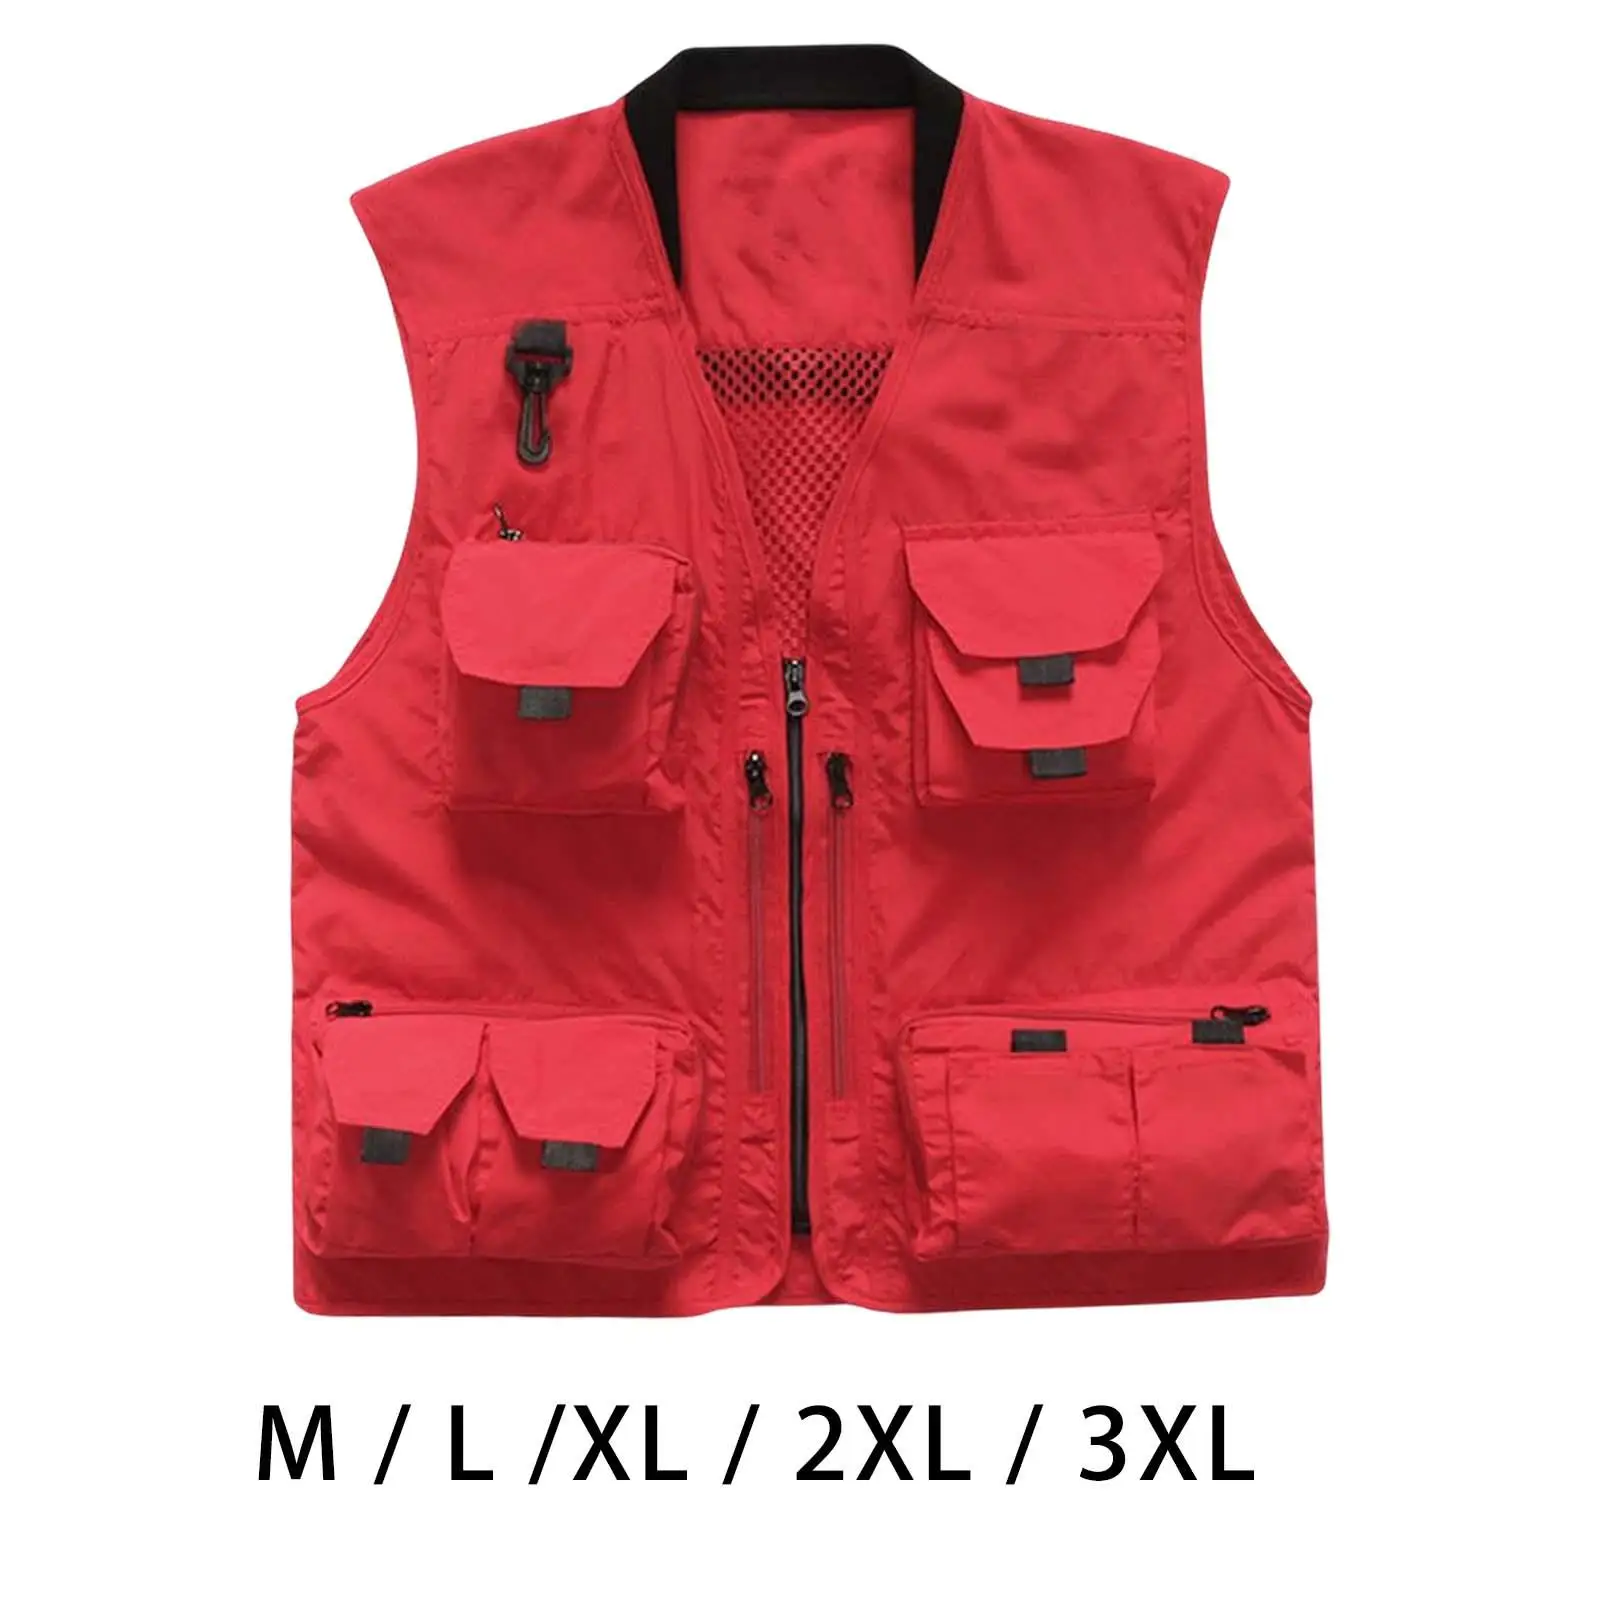 

Men Fishing Vest with Pockets Fishermen Clothing Mesh Casual Jacket for Climbing Outdoor Activities Hiking Sports